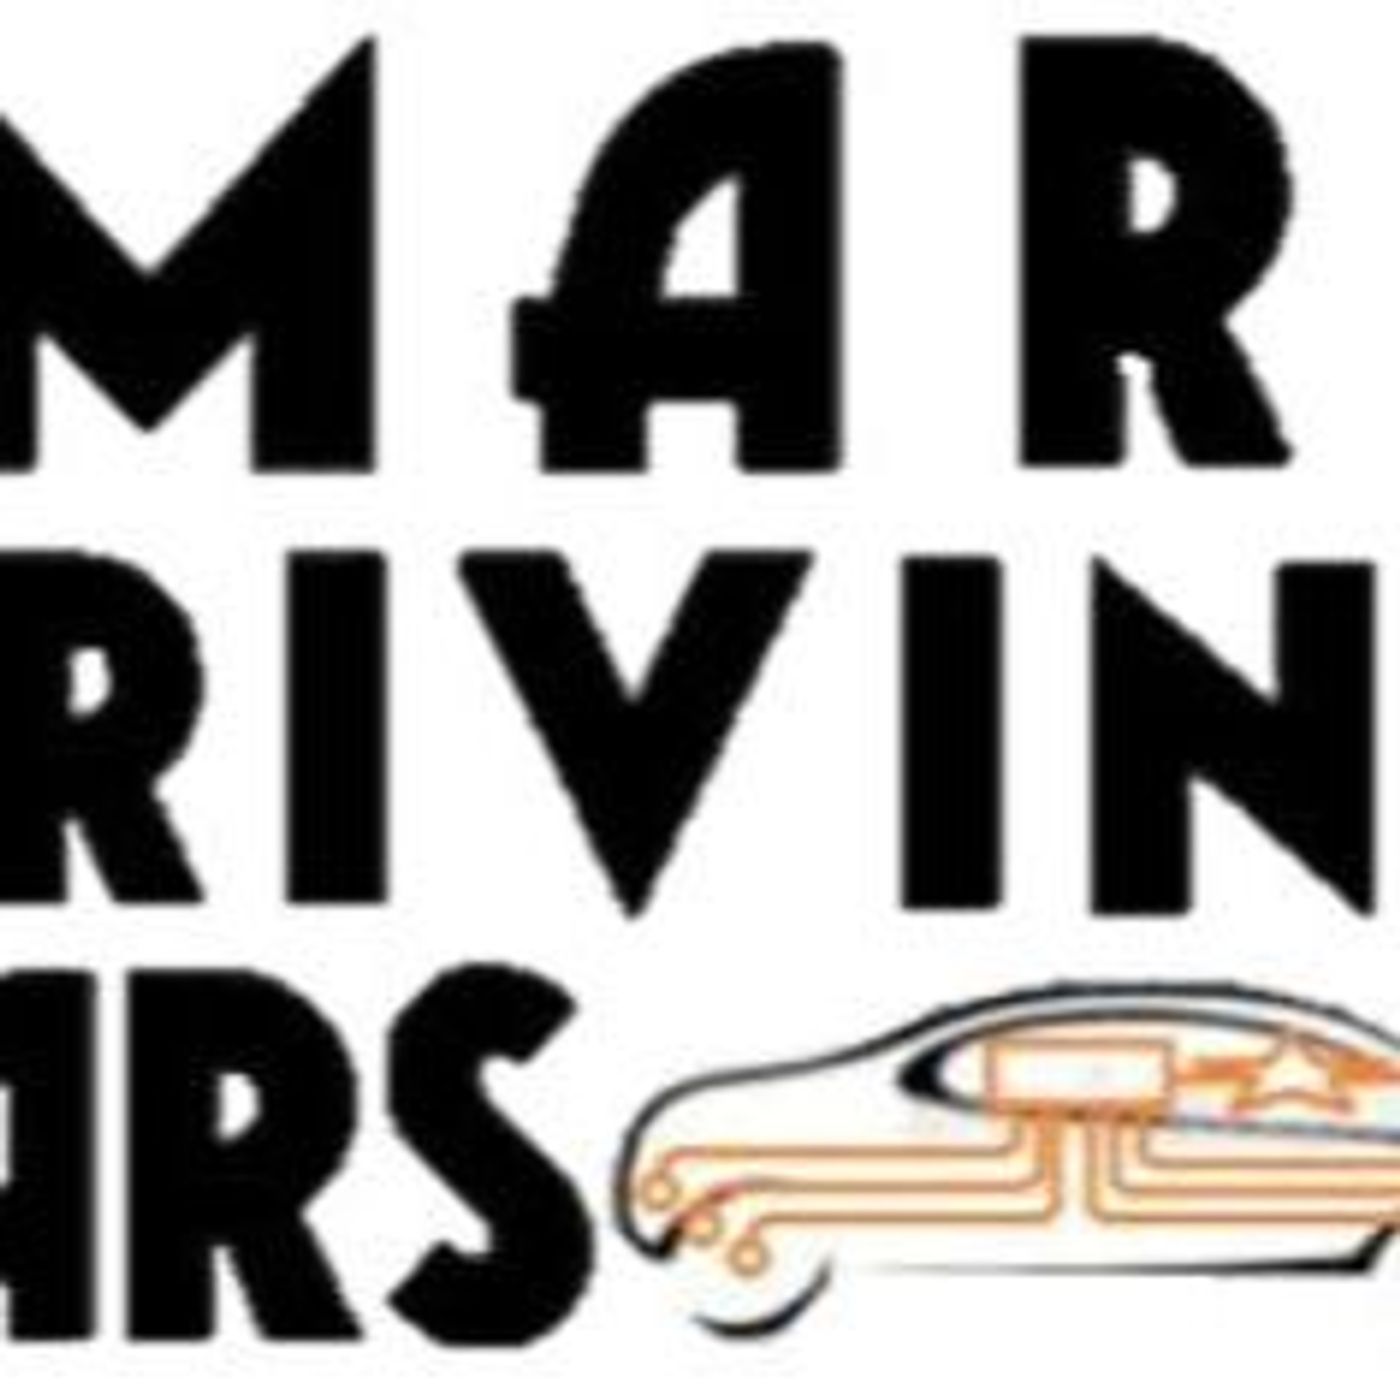 Smart Driving Cars Episode 46